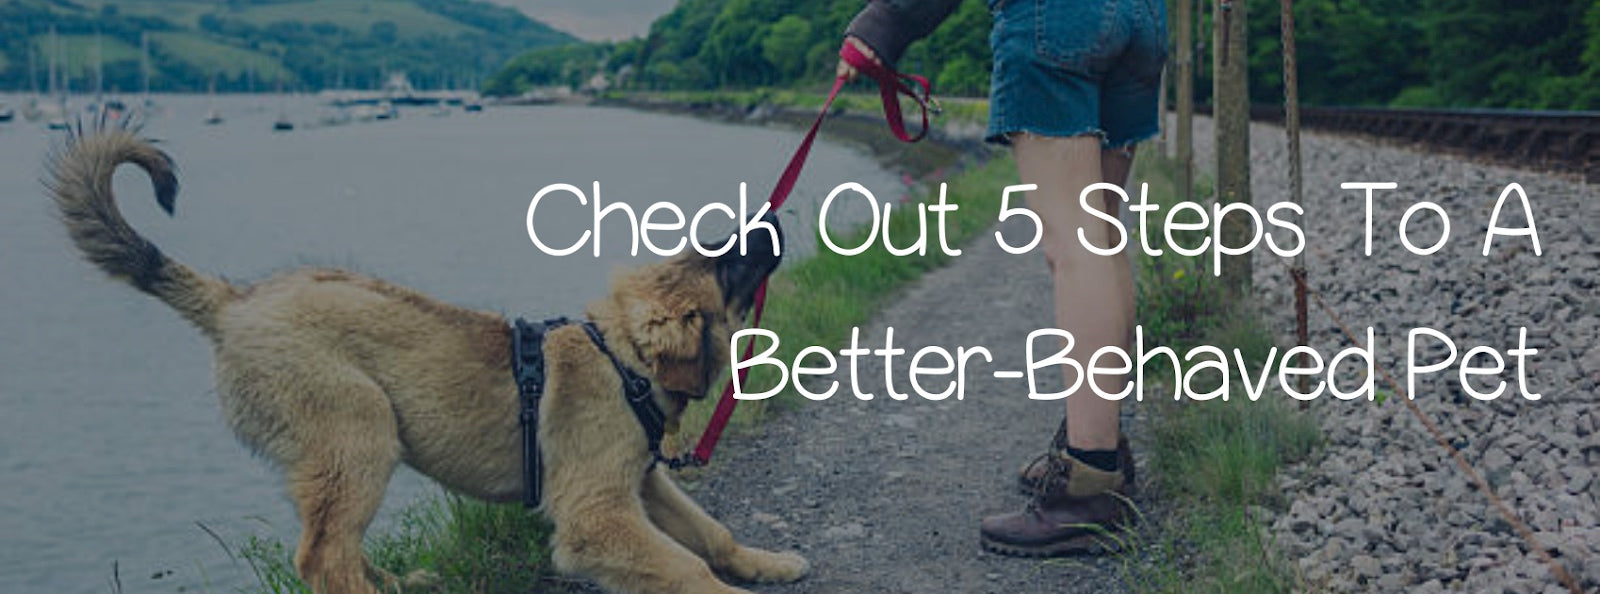 CHECK OUT 5 STEPS TO A  BETTER-BEHAVED DOG